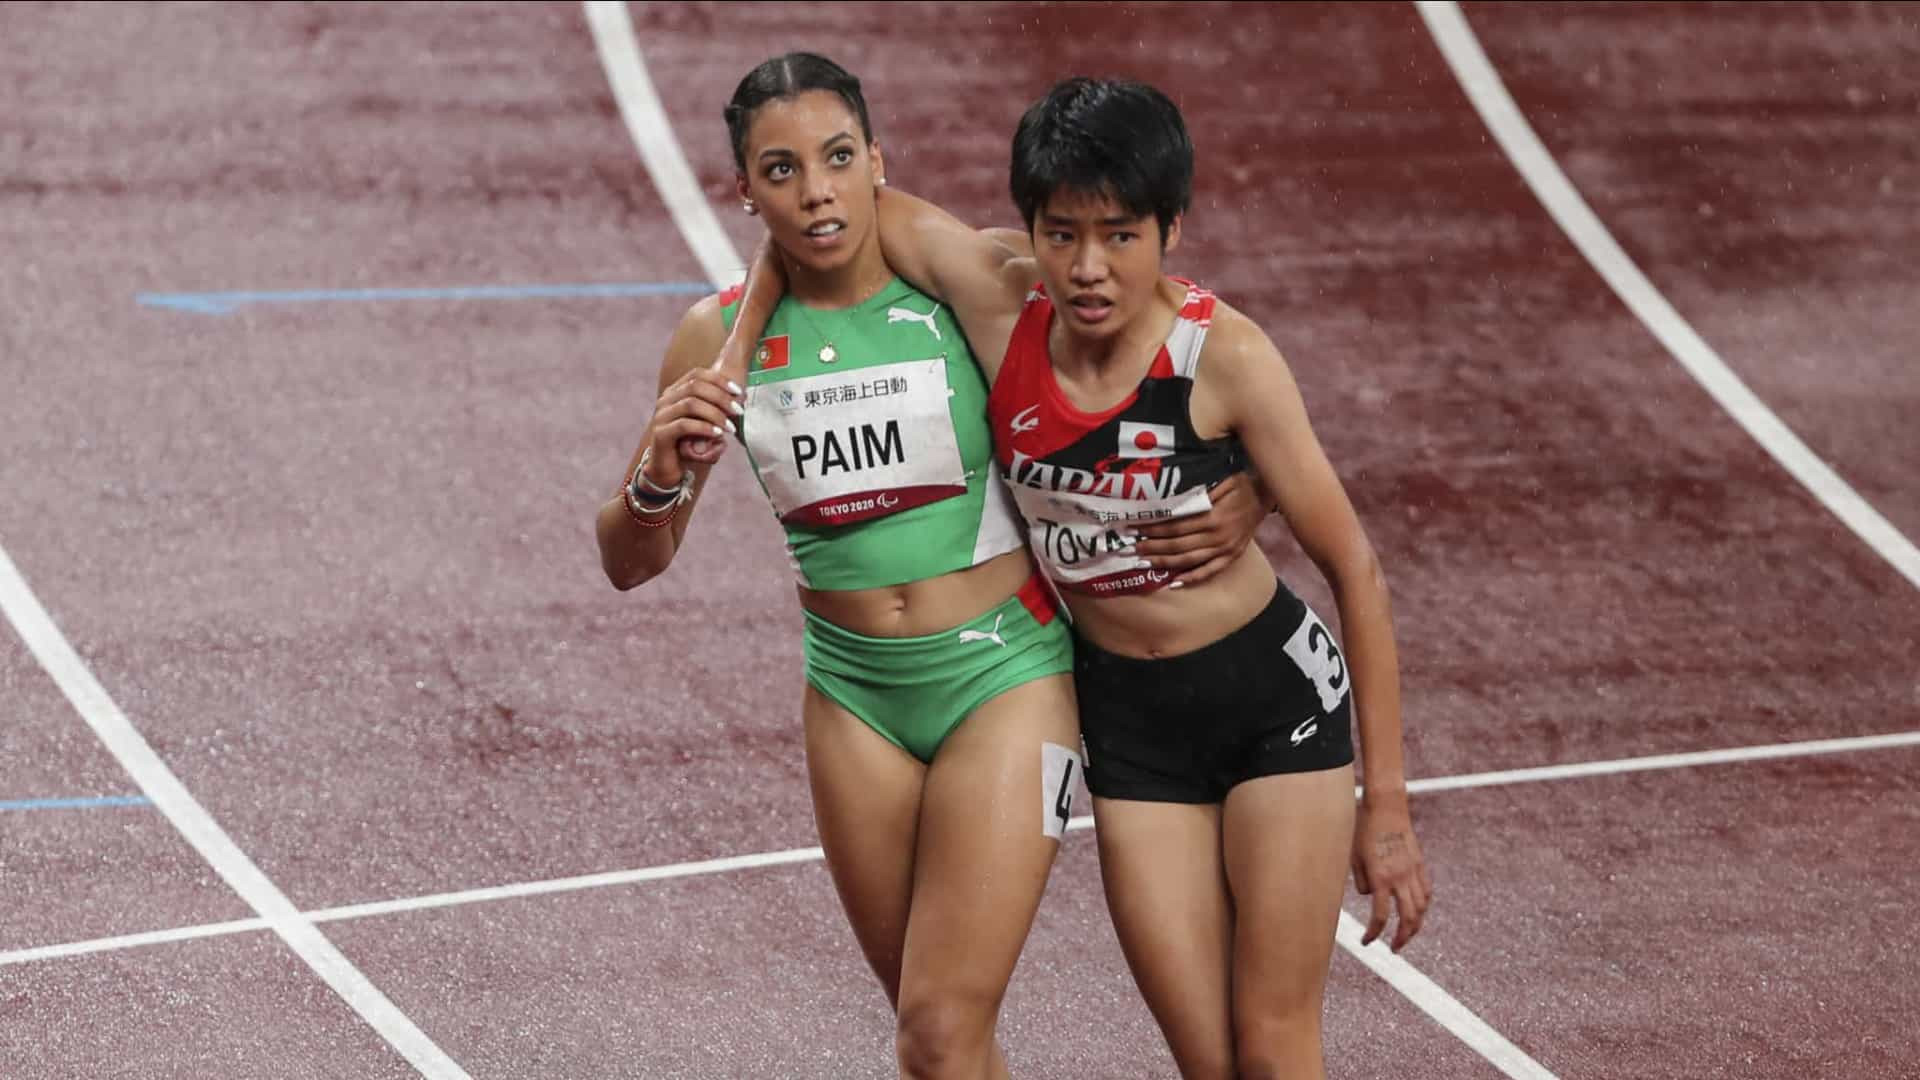 Carina Paim helped Aimi Toyama after the T20 400m race at Tokyo 2020 ©Lusa